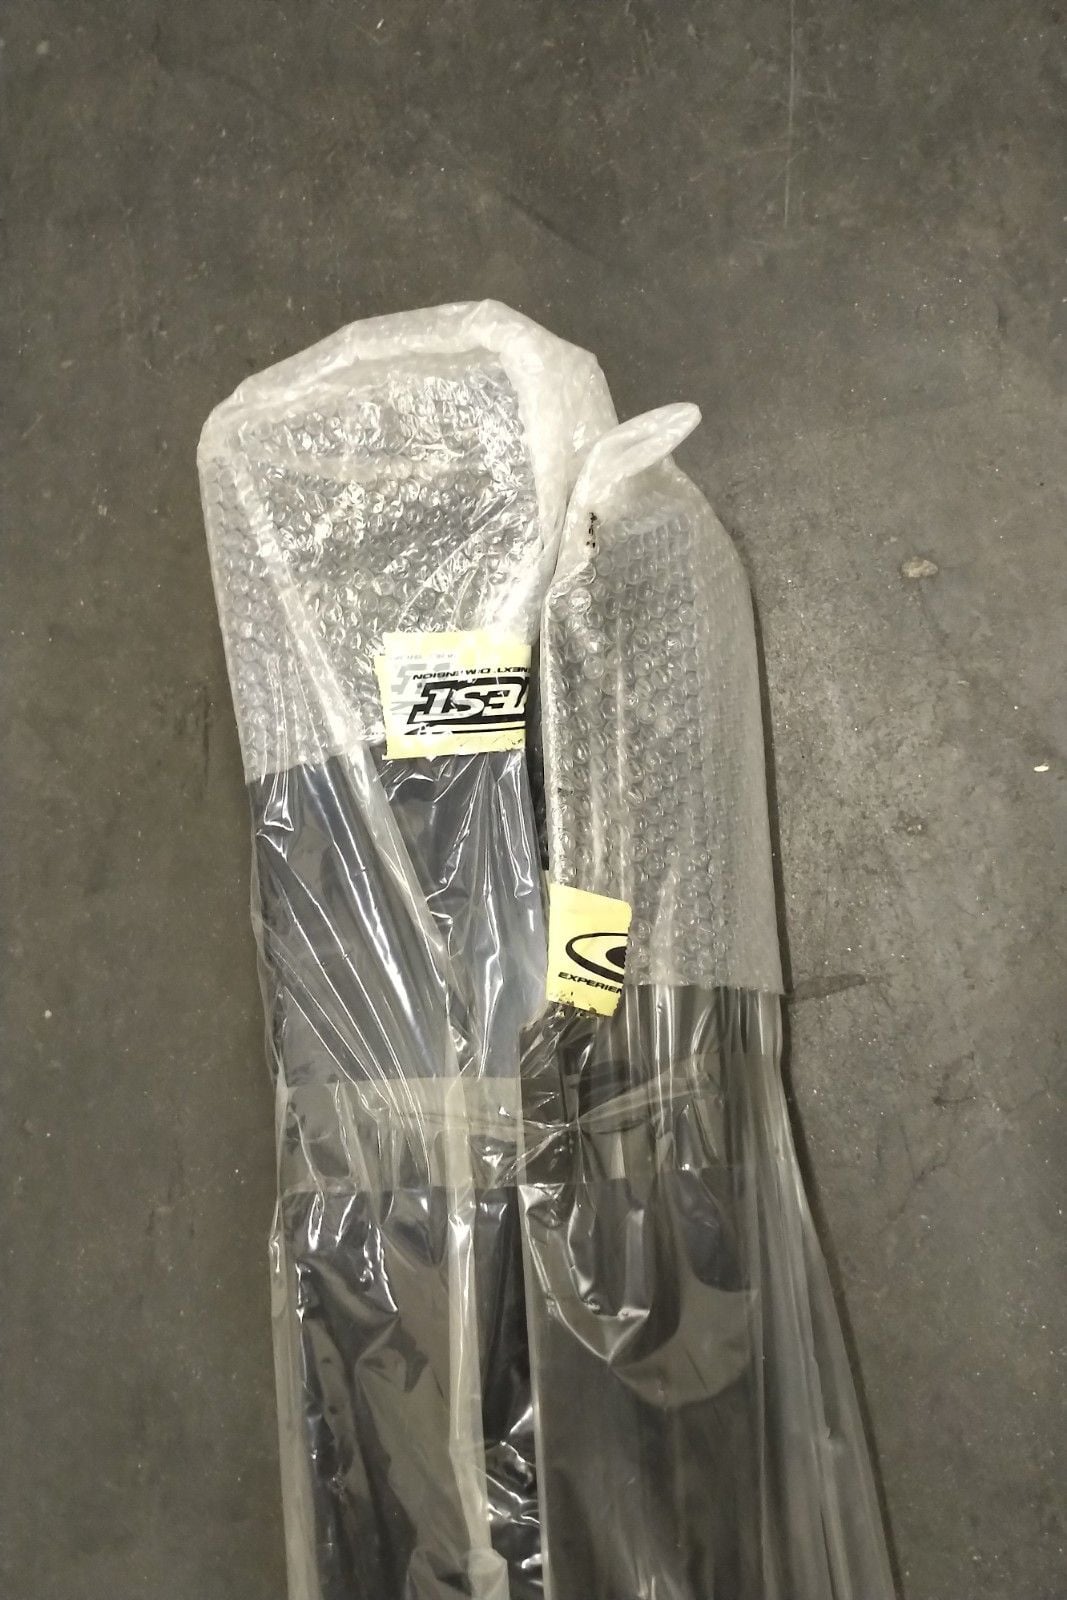 Miscellaneous - Mass Part Out - Aftermarket New Used - OE Exhaust - Used - All Years  All Models - Whittier, CA 90605, United States